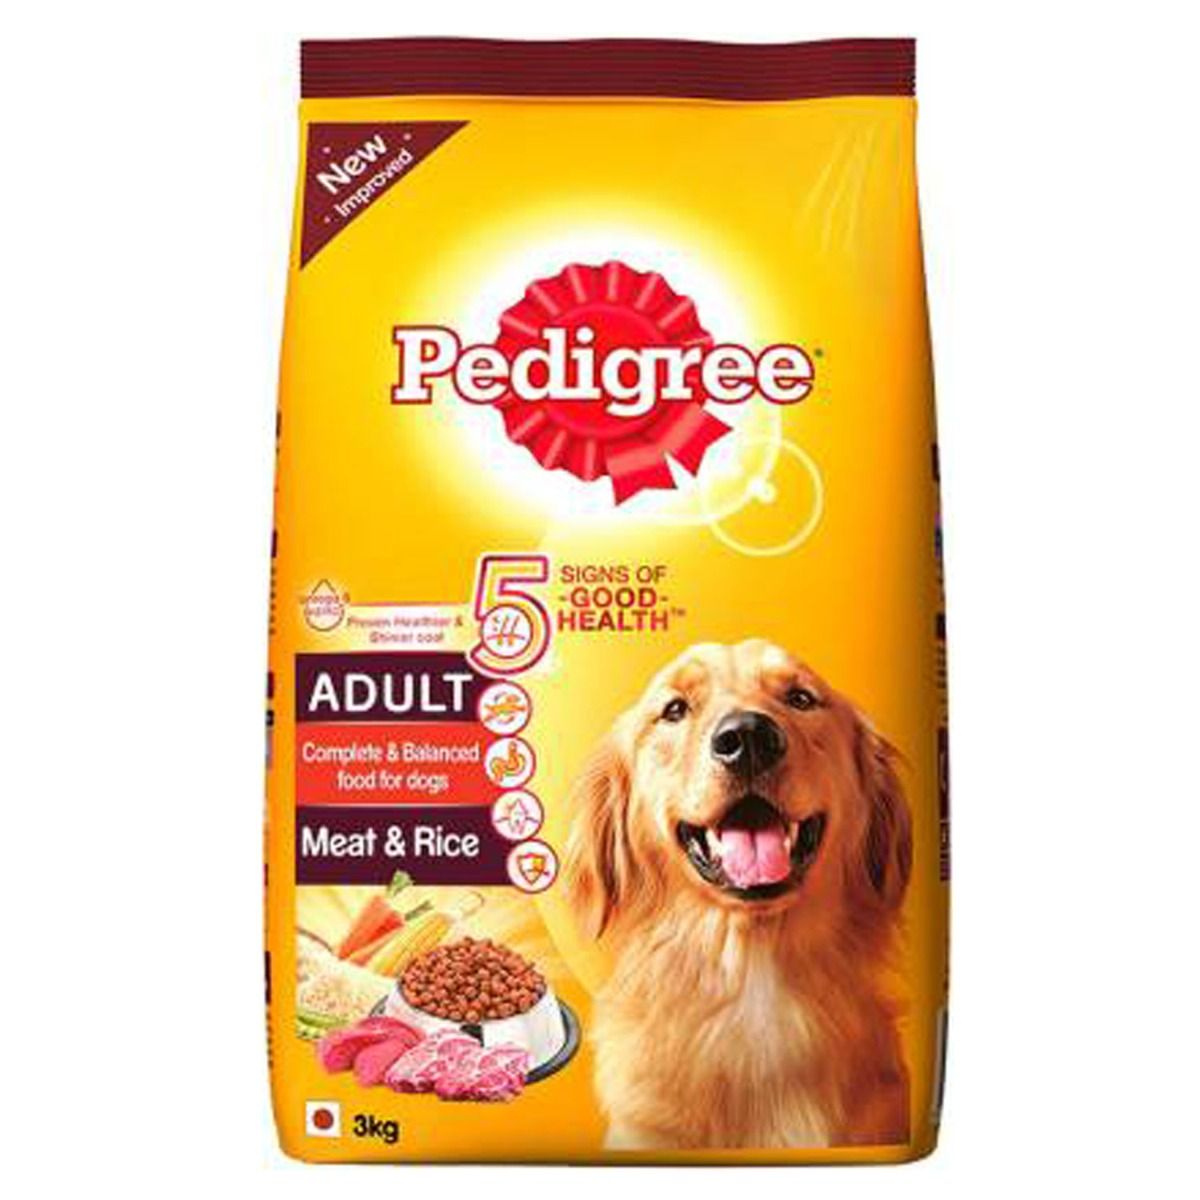 Pedigree Adult Dog Food With Meat & Rice, 3 kg, Pack of 1 